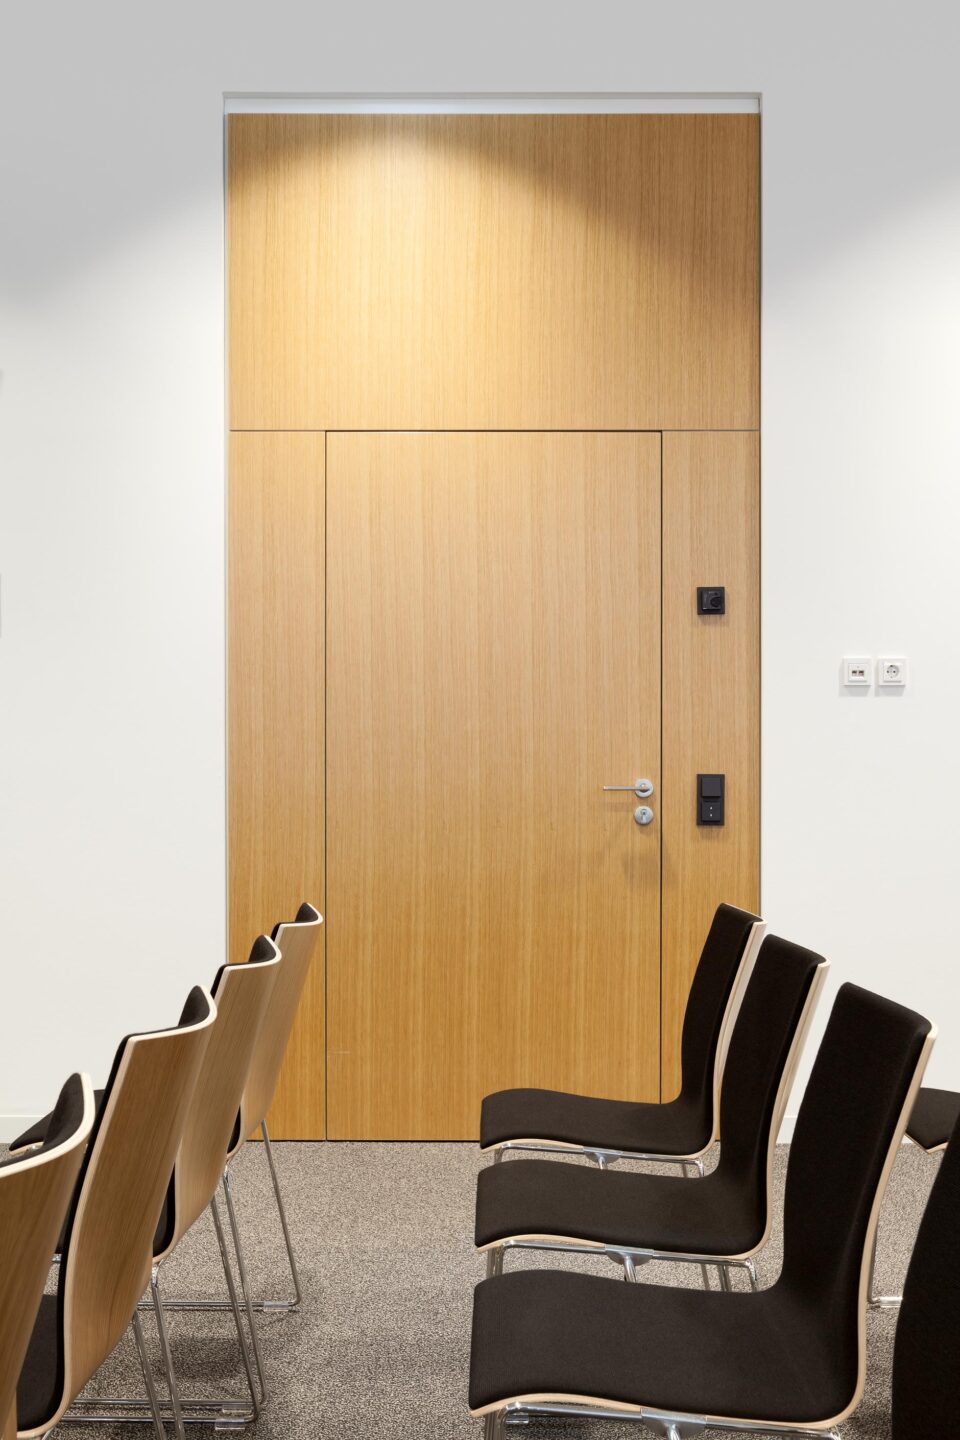 Sparkasse Ulm Haus 66 │ frameless fecostruct structural glazing │ meeting room